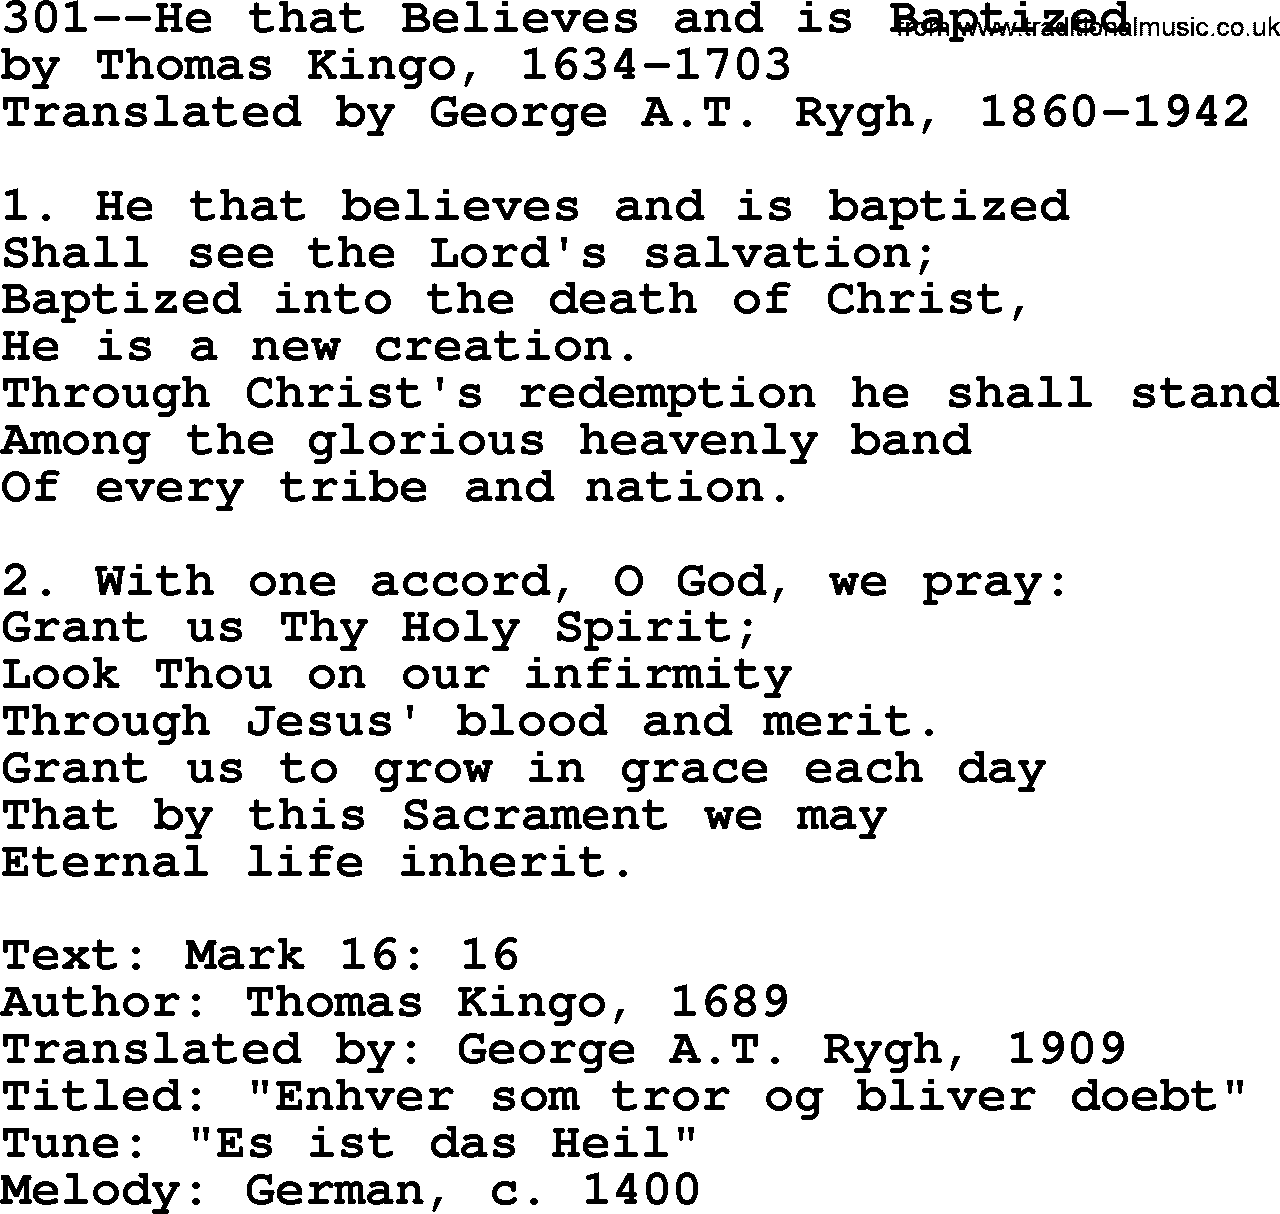 Lutheran Hymn: 301--He that Believes and is Baptized.txt lyrics with PDF